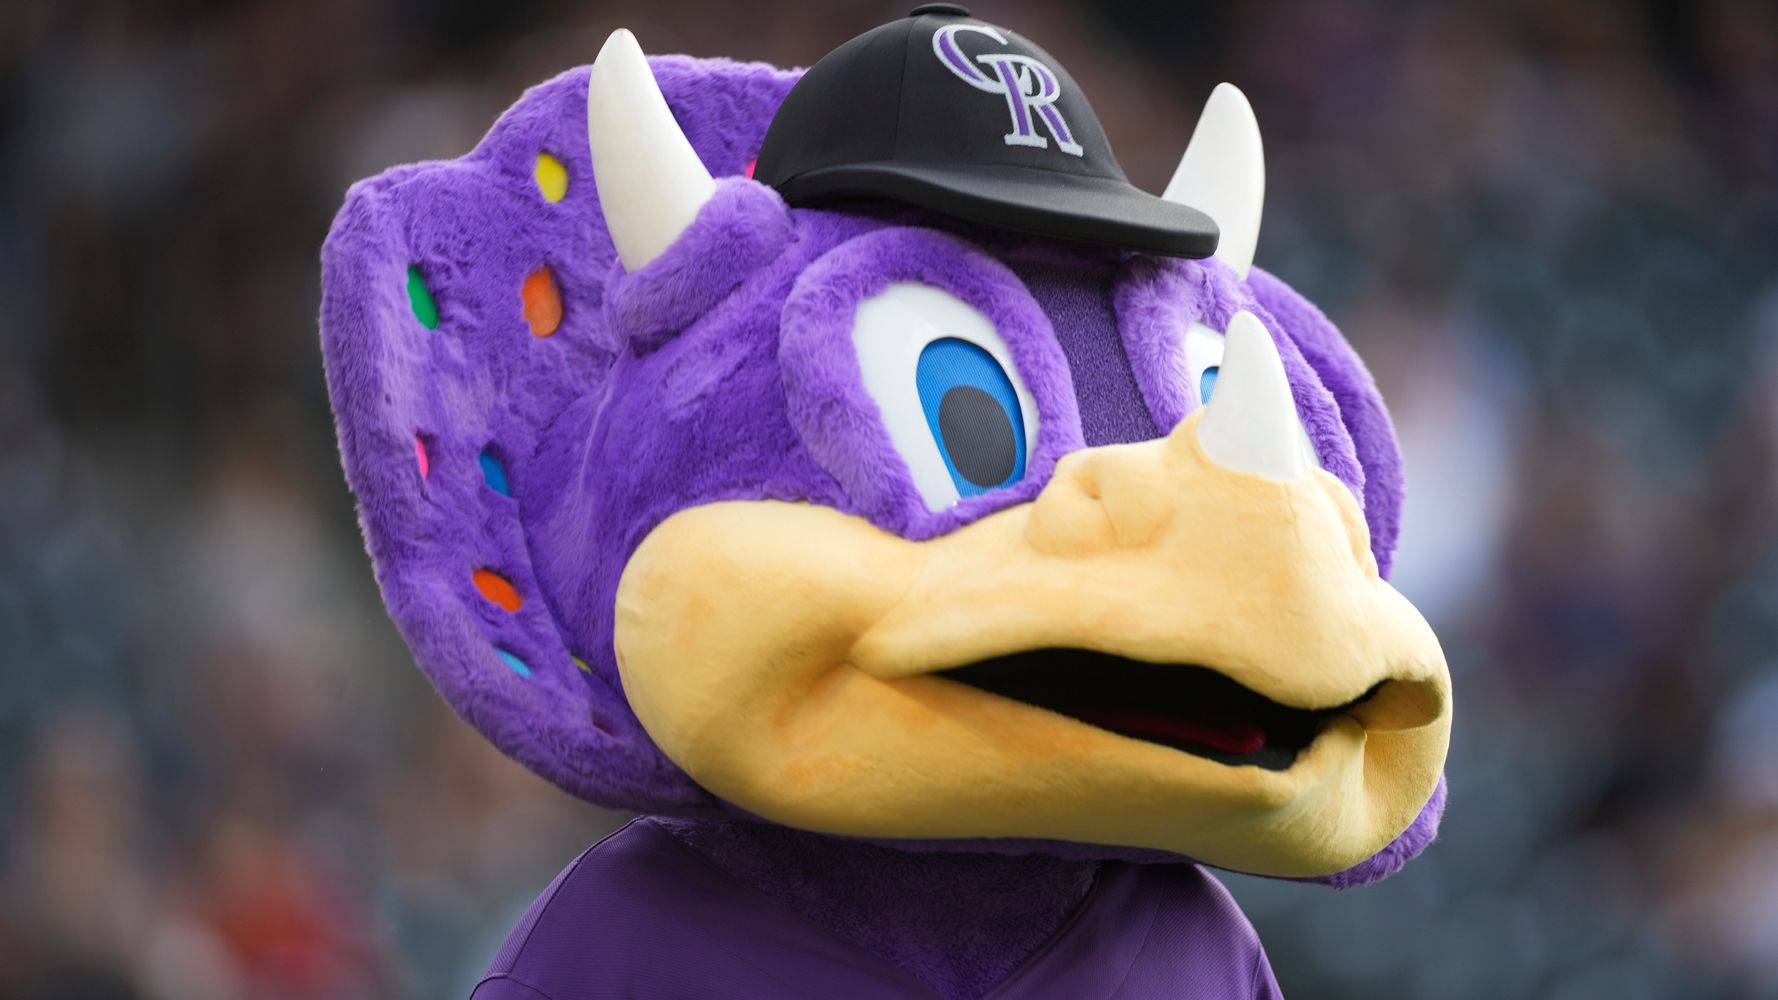 Colorado Rockies mascot Dinger attacked by fan during game